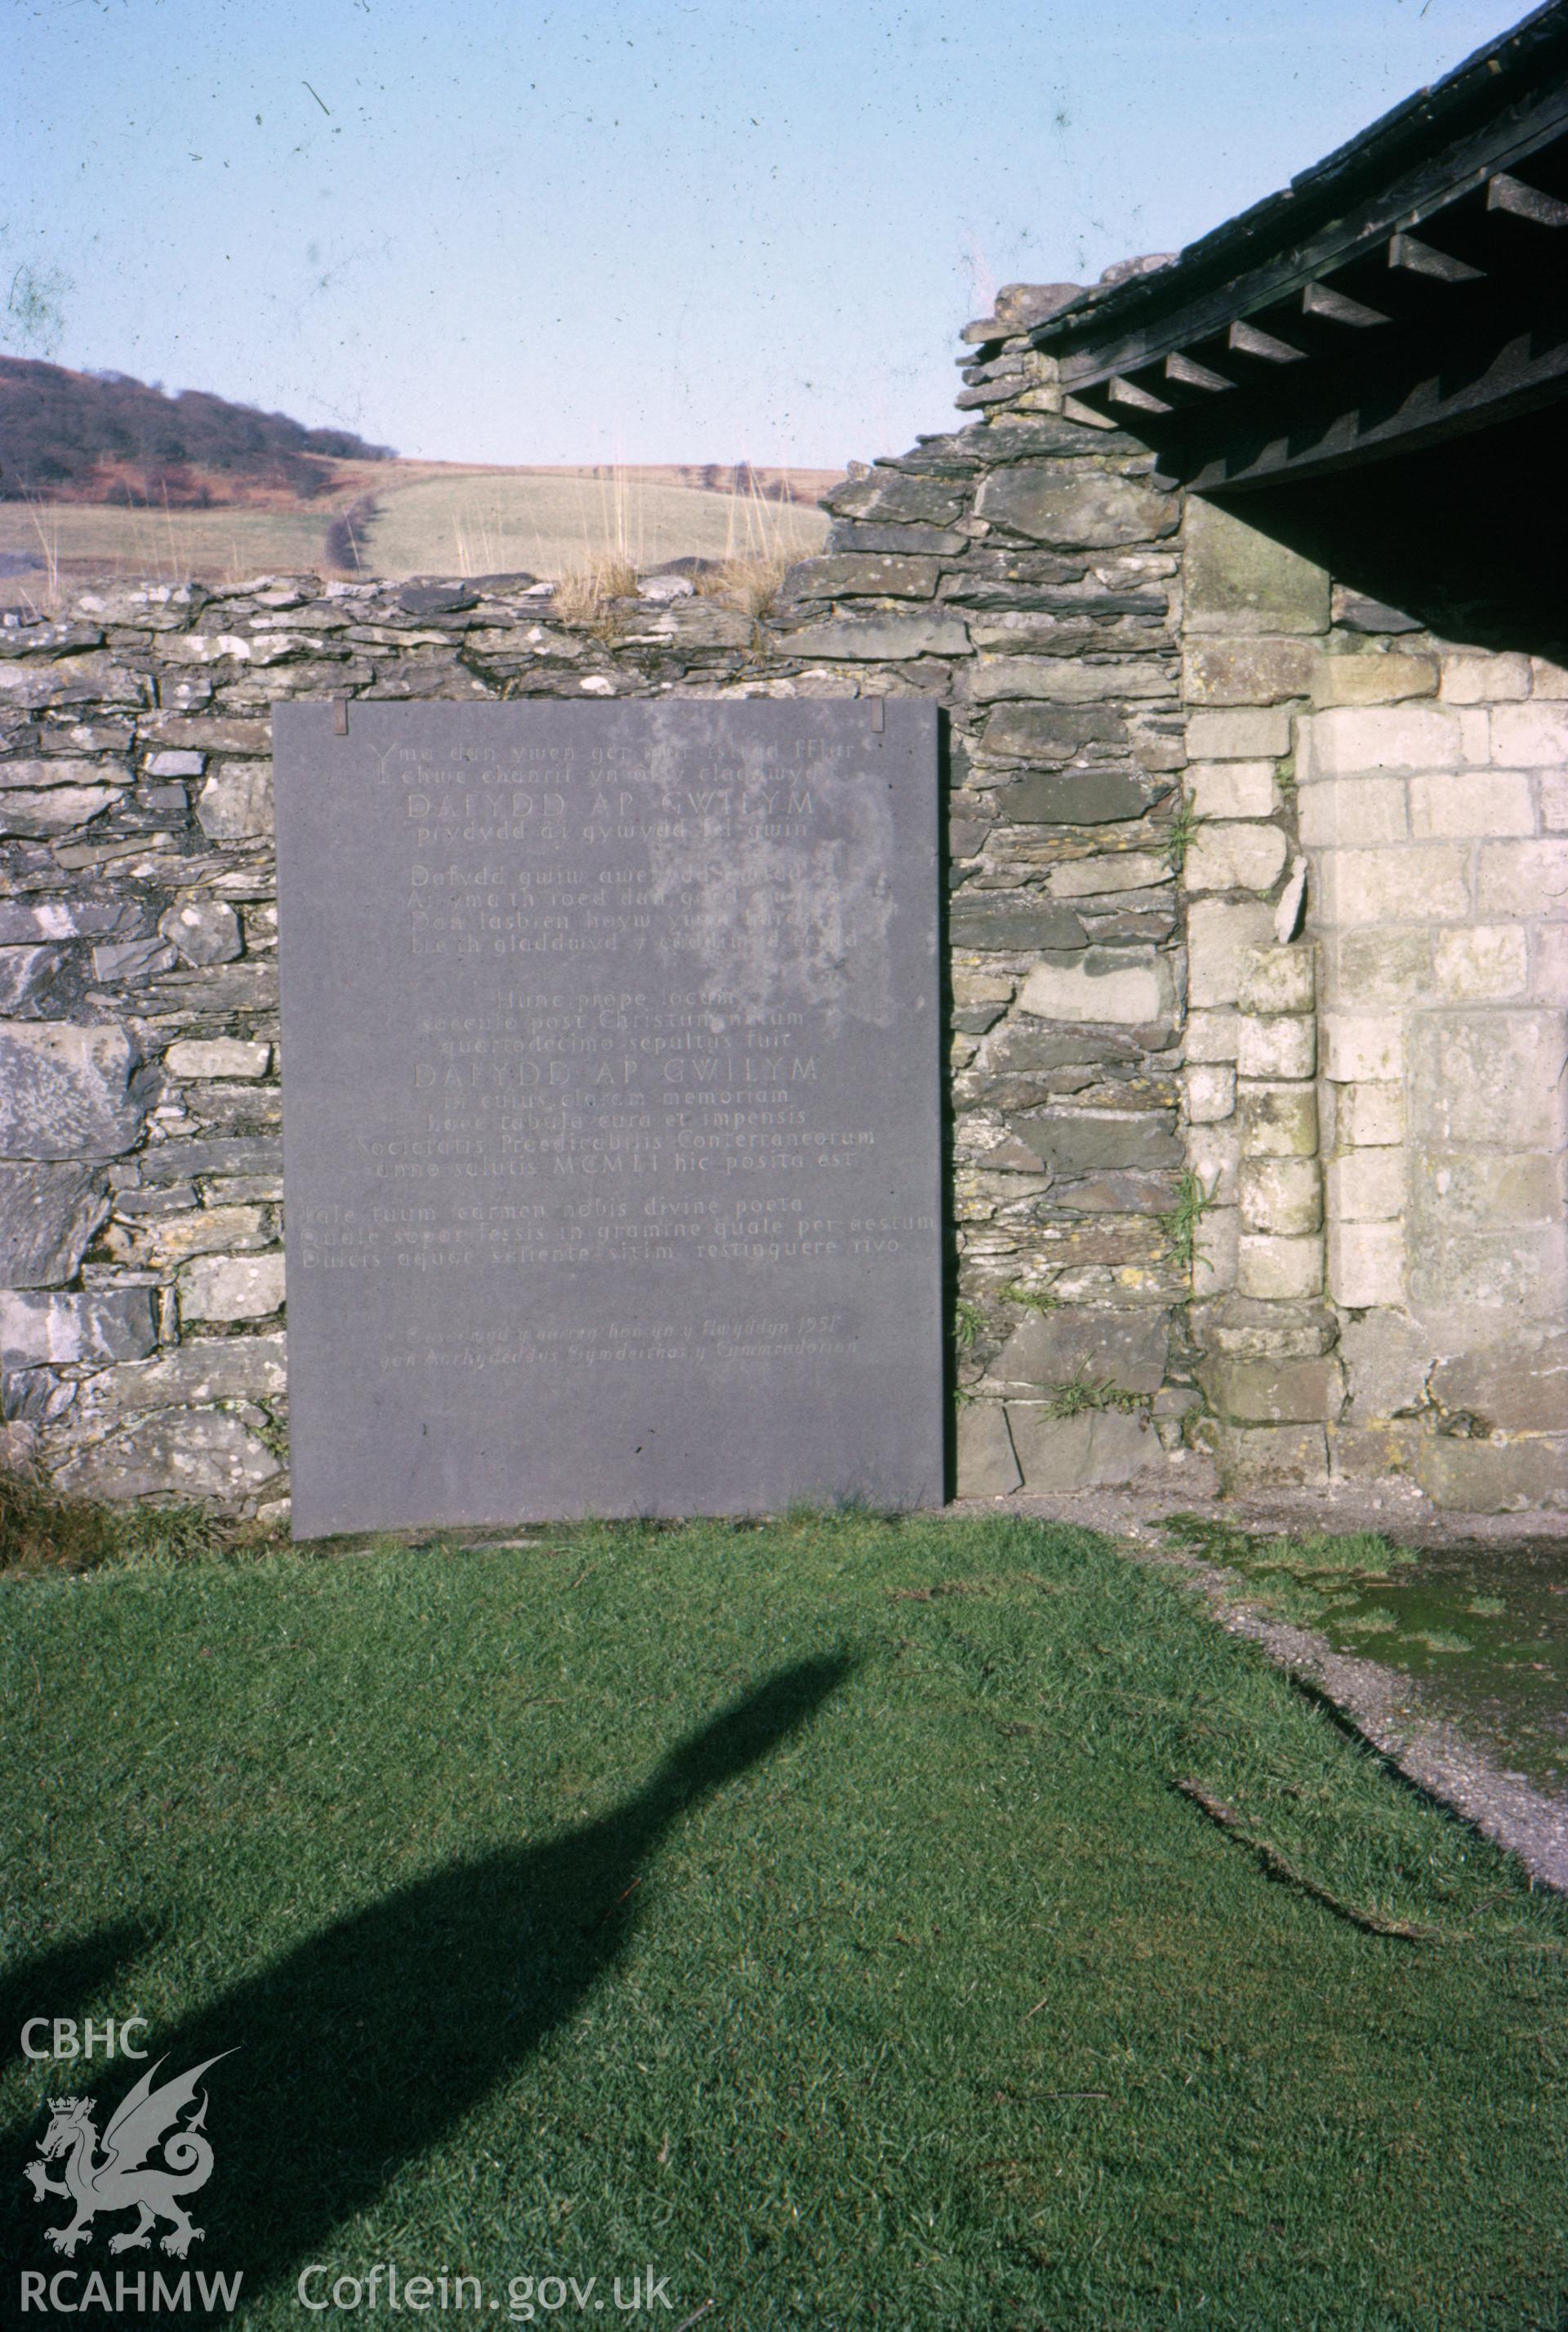 Colour slide showing memorial to Dafydd ap Gwilym in the churchyard at St Mary's Church.